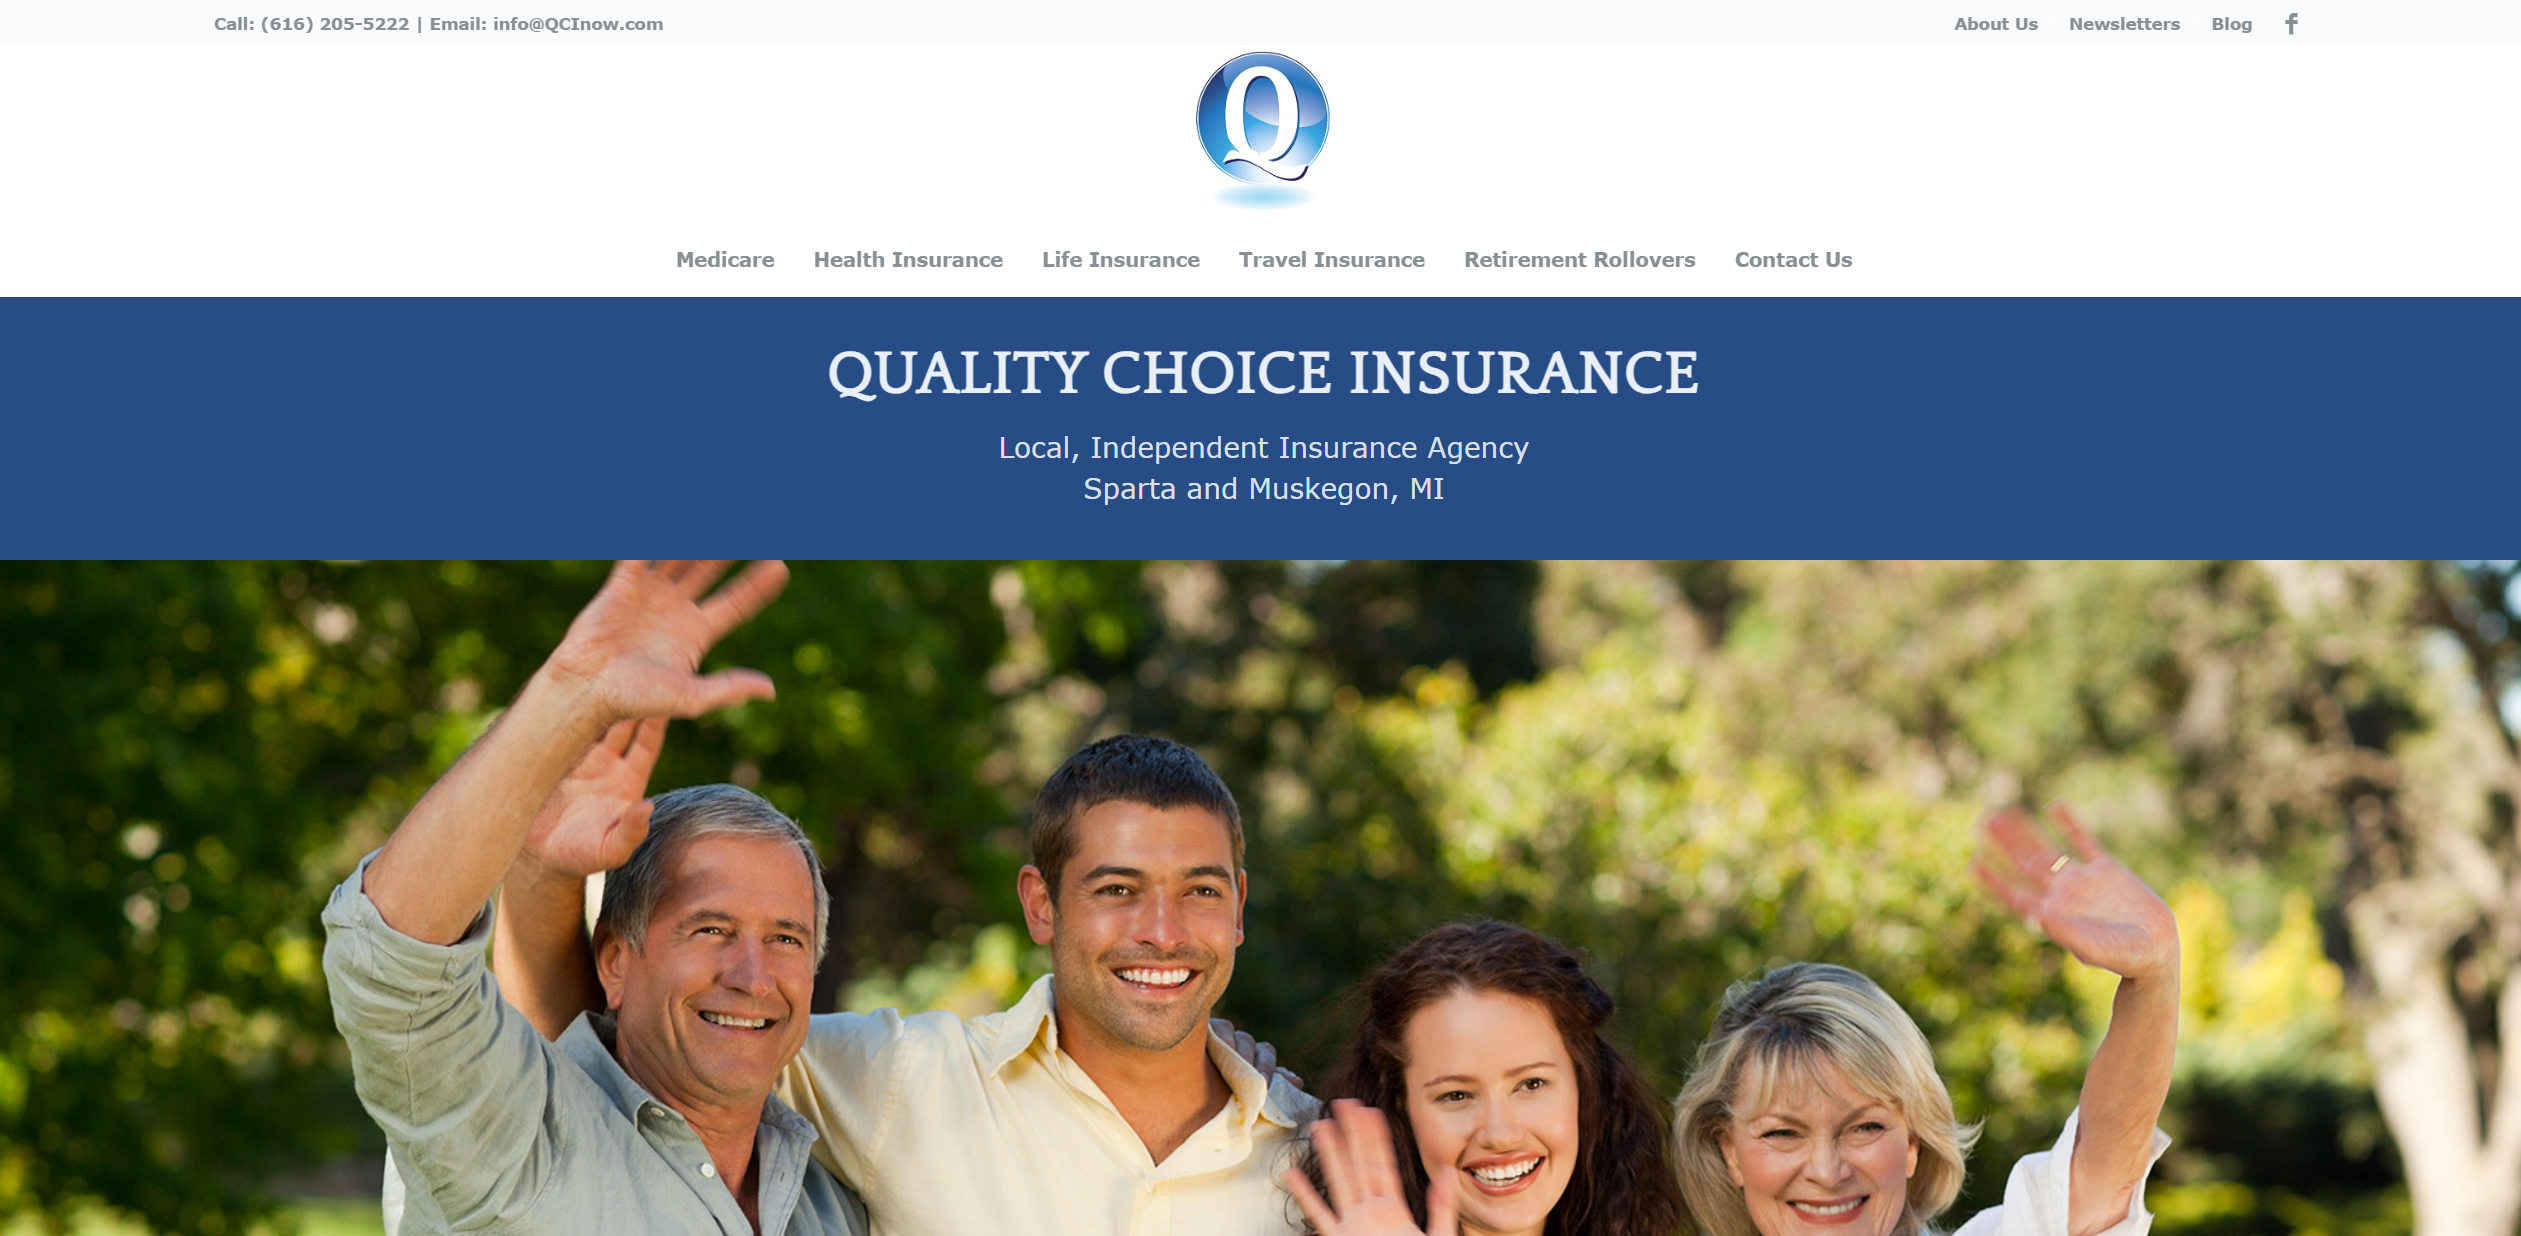 Website Design for Quality Choice Insurance in Sparta and Muskegon MI by Purple Gen - Purple-Gen.com